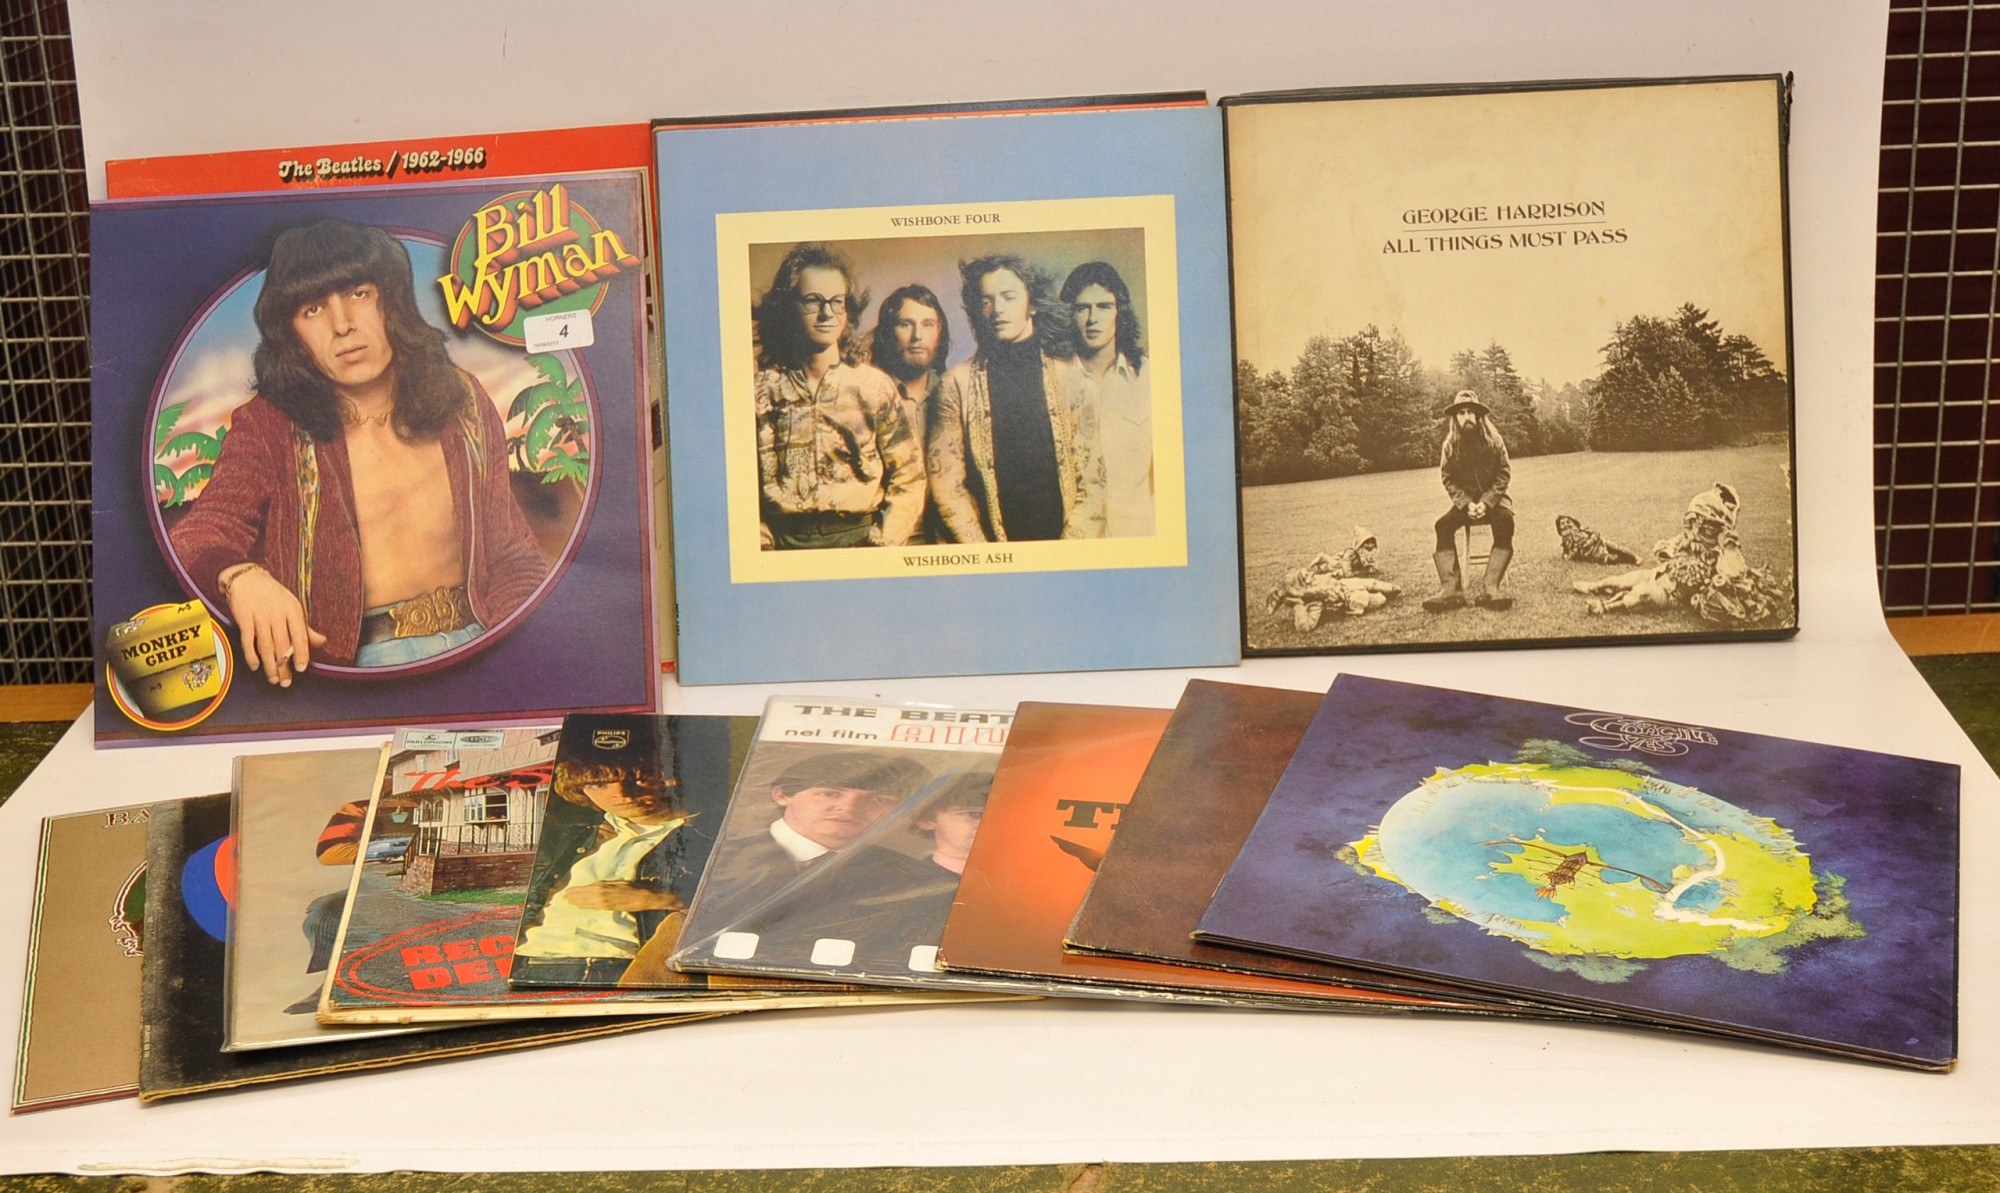 QUANTITY SIXTIES AND SEVENTIES LPS INCLUDING GEORGE HARRISON (ALL THINGS MUST PASS) WISHBONE ASH,